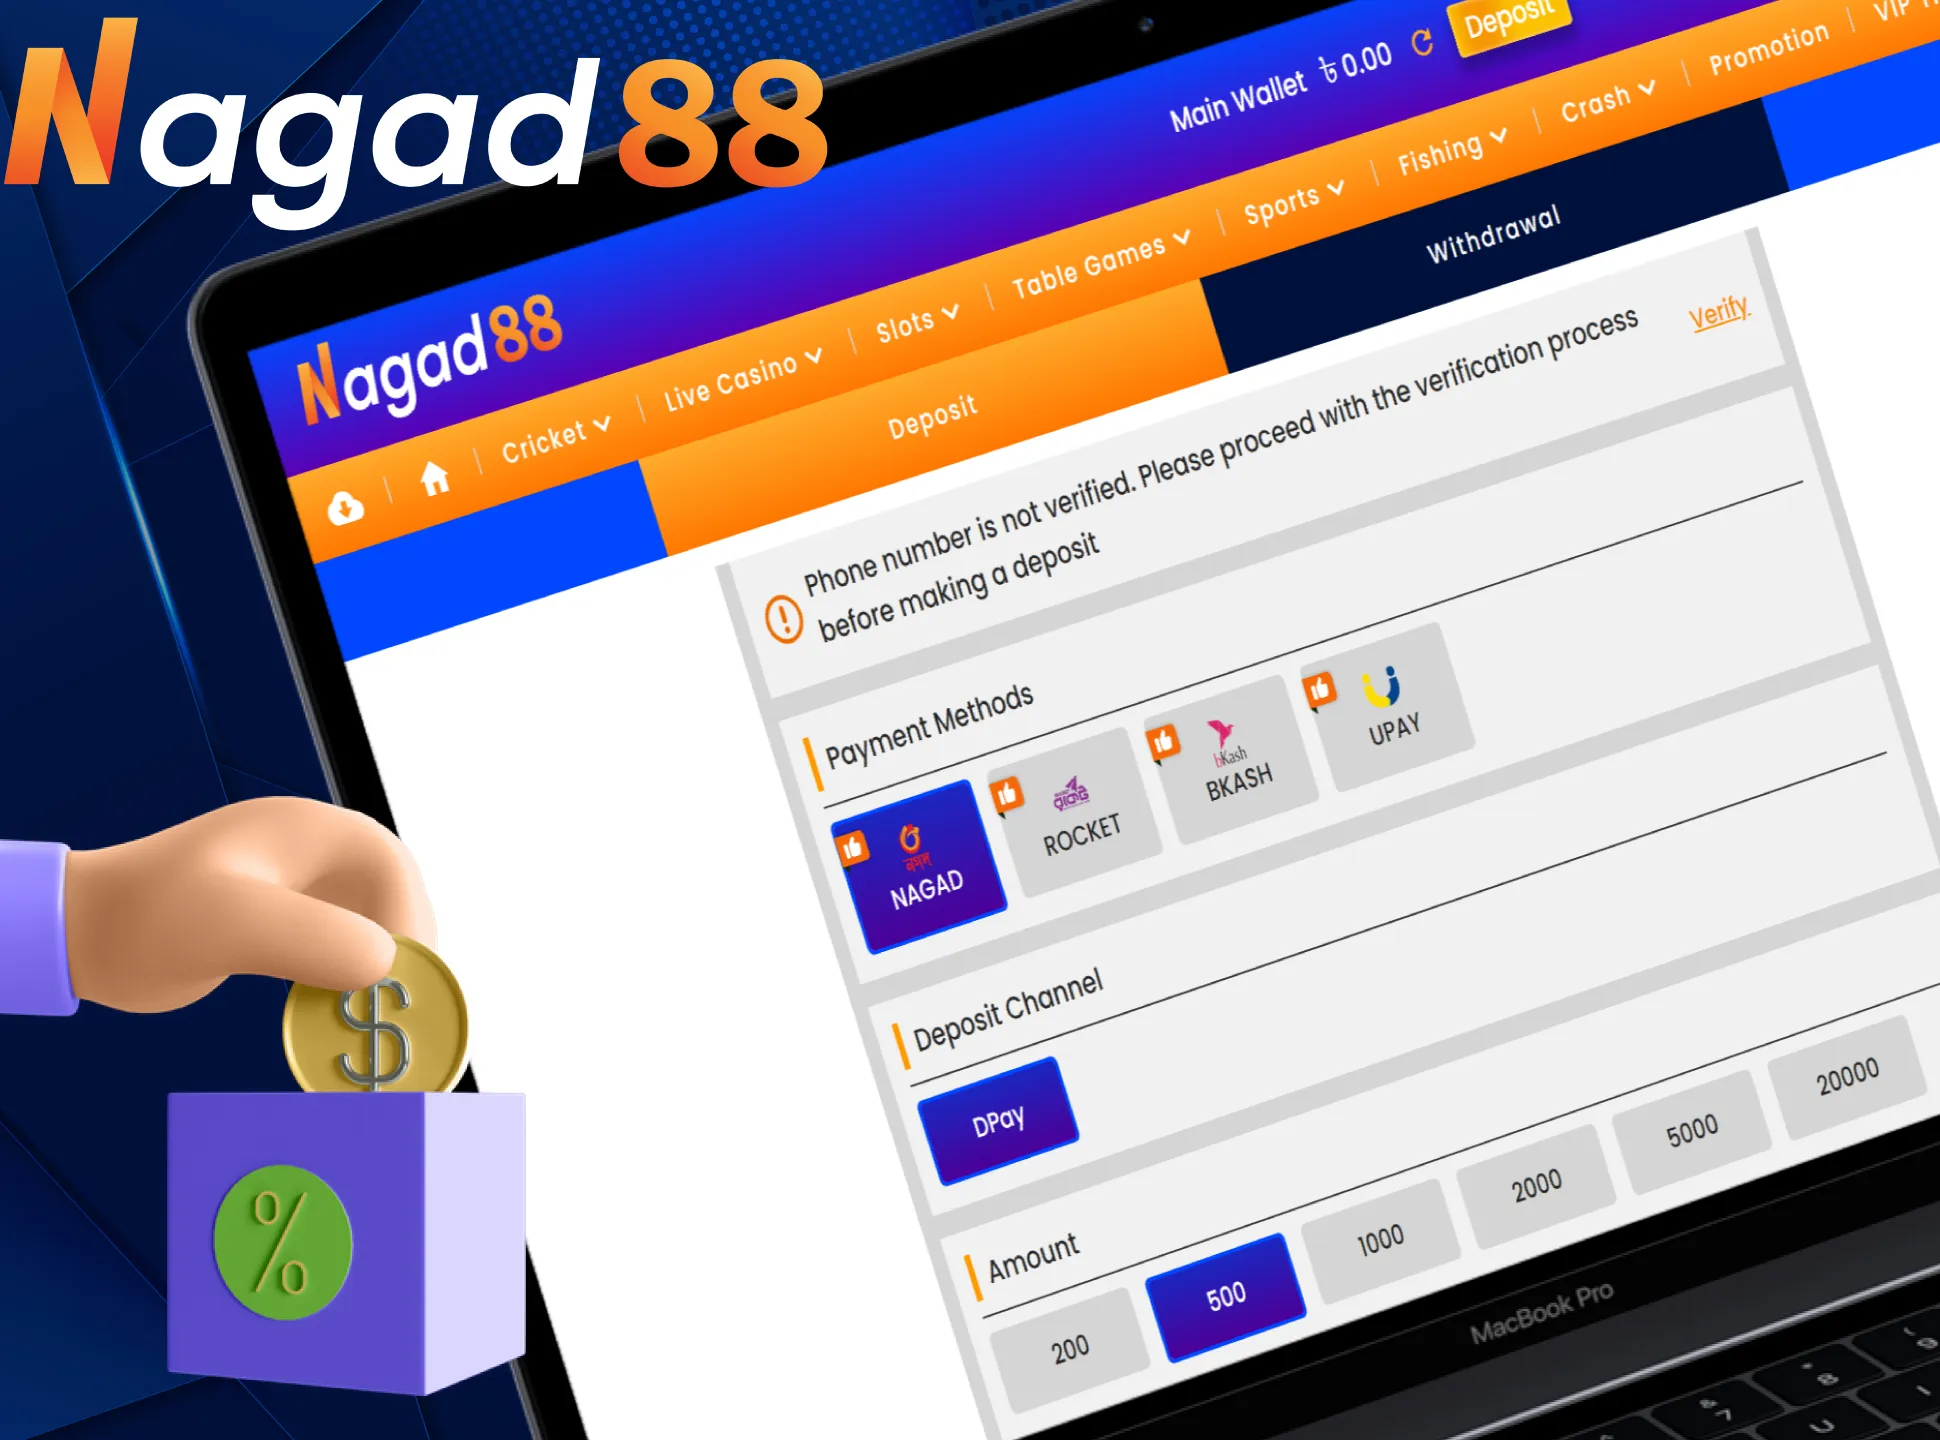 Find out how easy it is to top up your Nagad88 account and withdraw money.